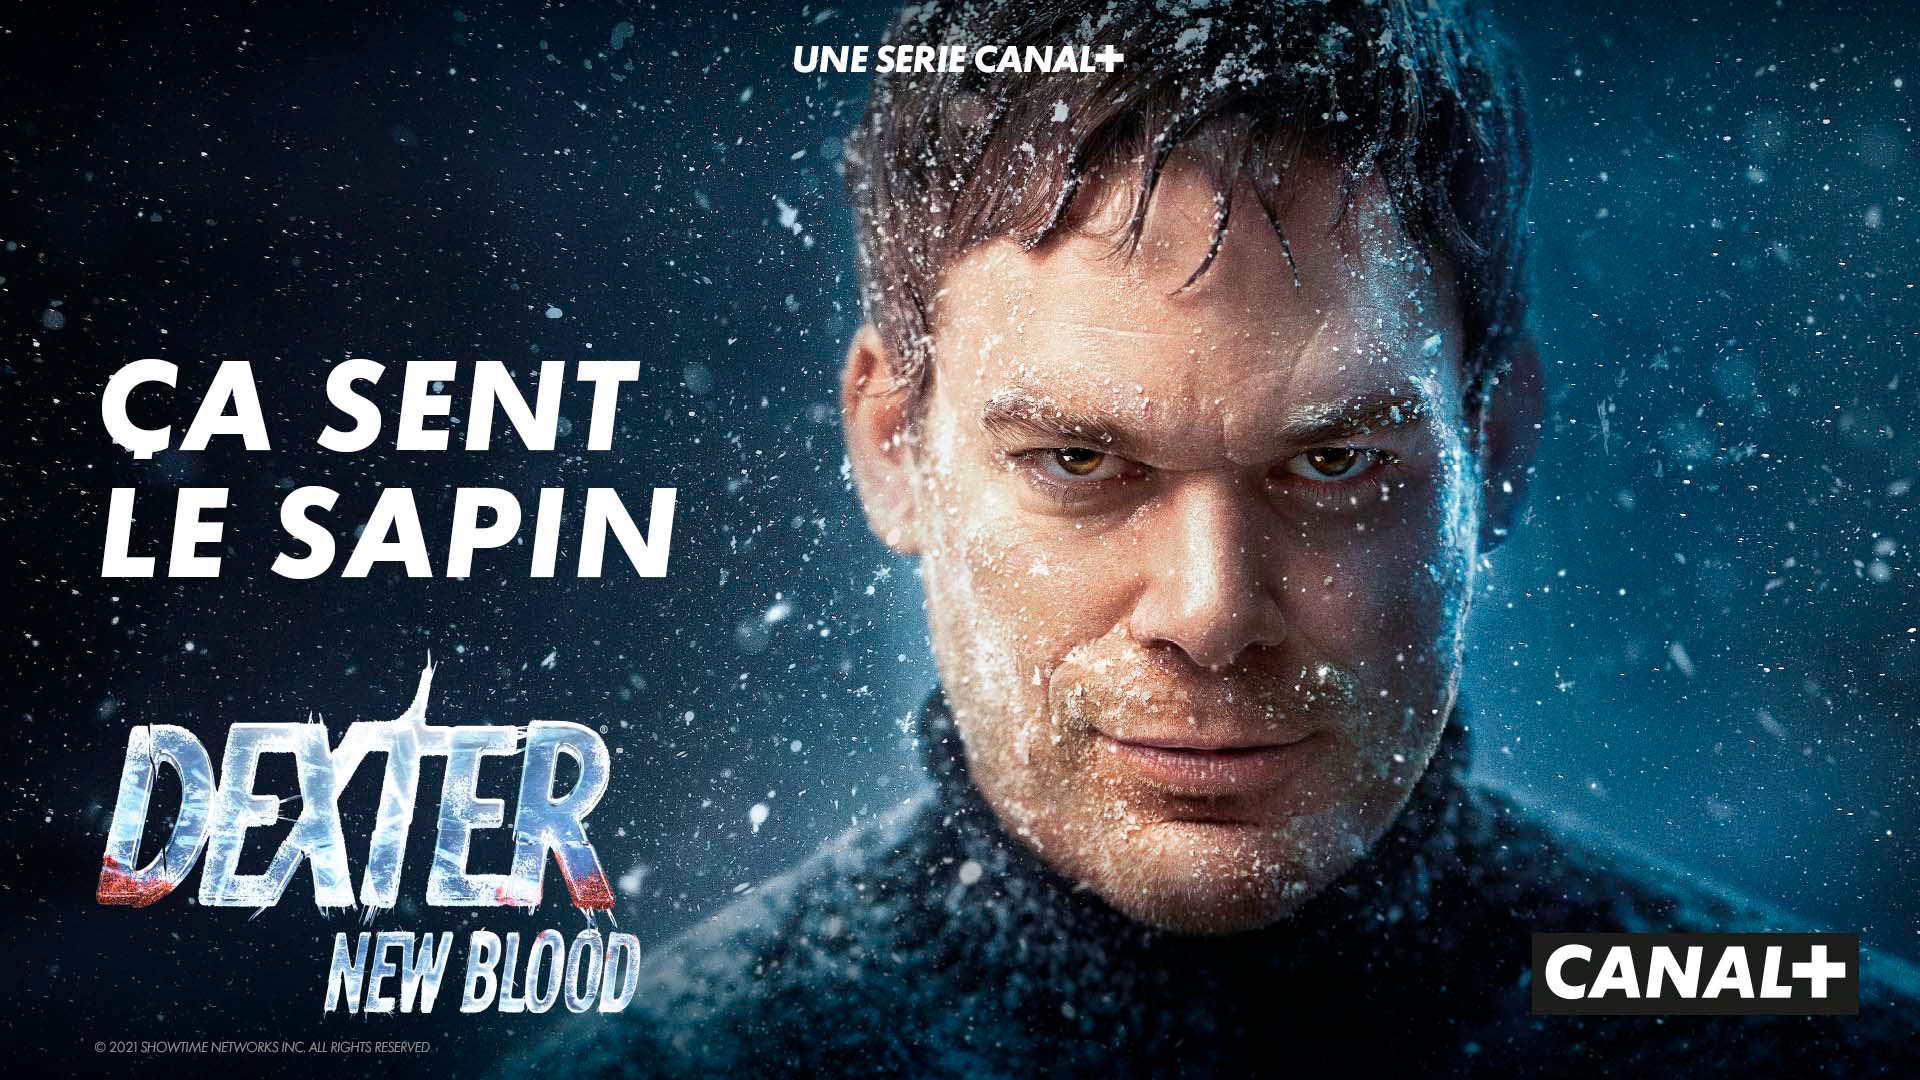 Dexter: New Blood, exclusively on myCANAL